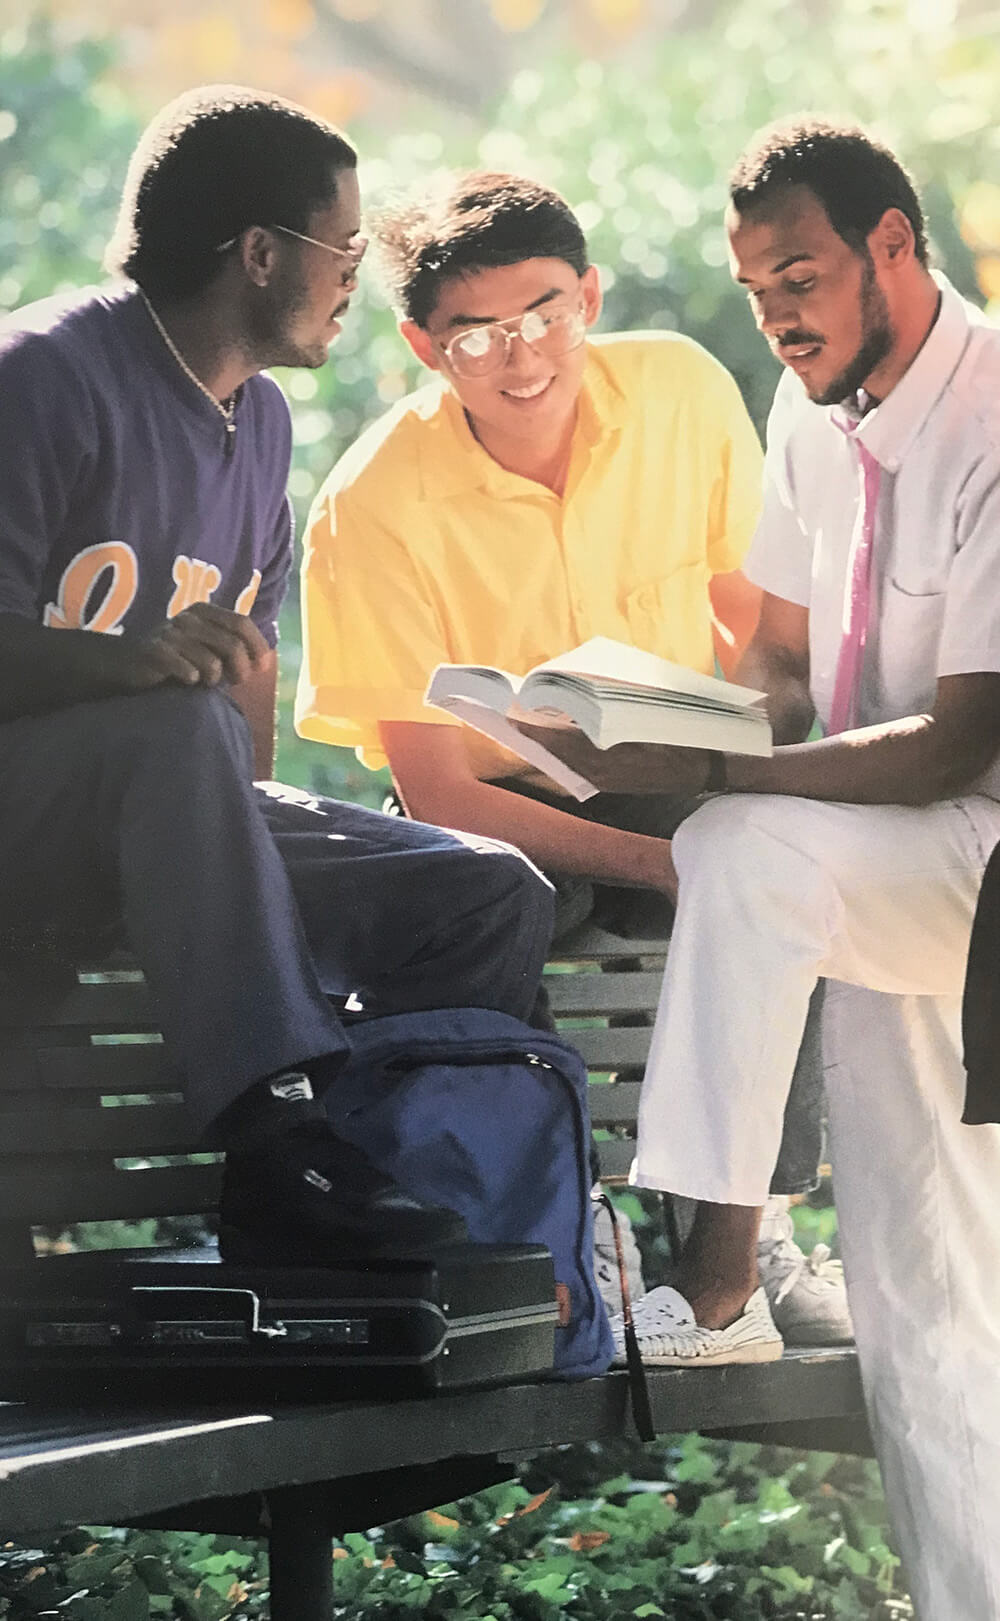 Jalani Bakari ’88 (in white) with a group of UCR students in the late 1980s. (Courtesty of Bakari)